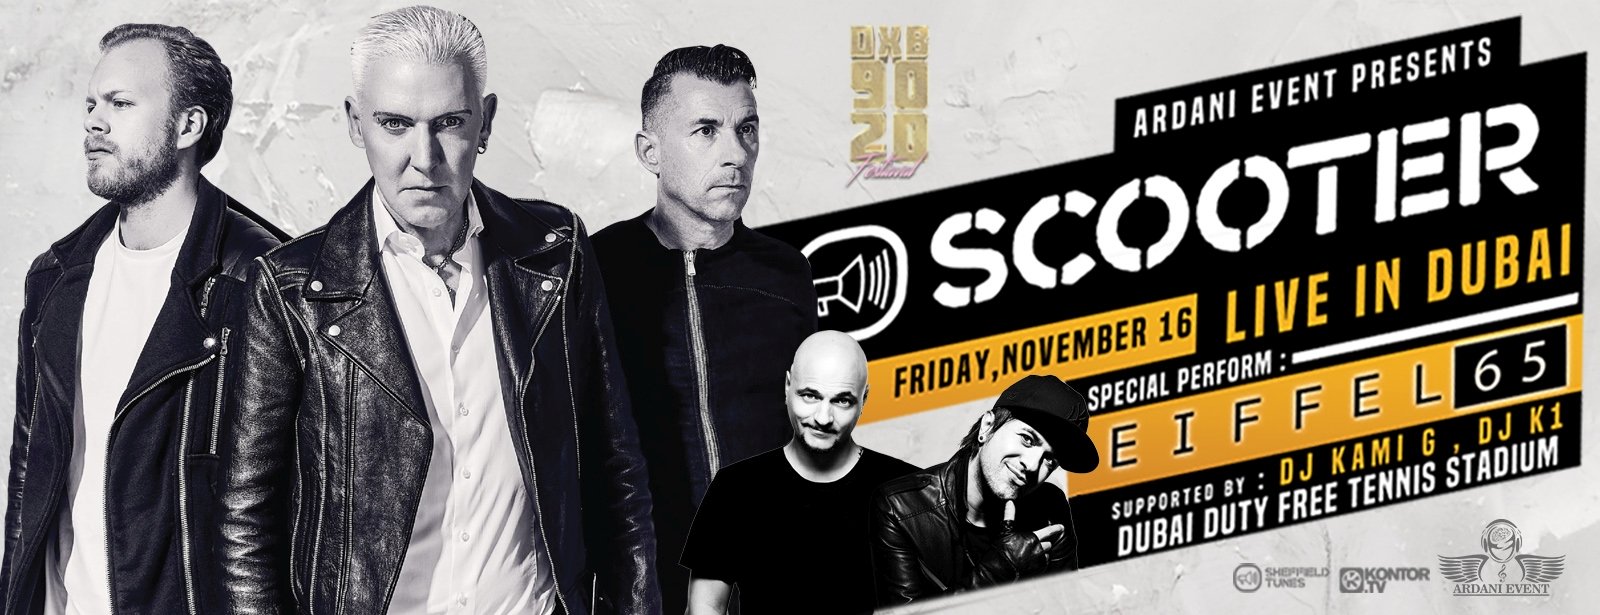 DXB 9020 FEST – Scooter and Eiffel 65 Live in Dubai - Coming Soon in UAE